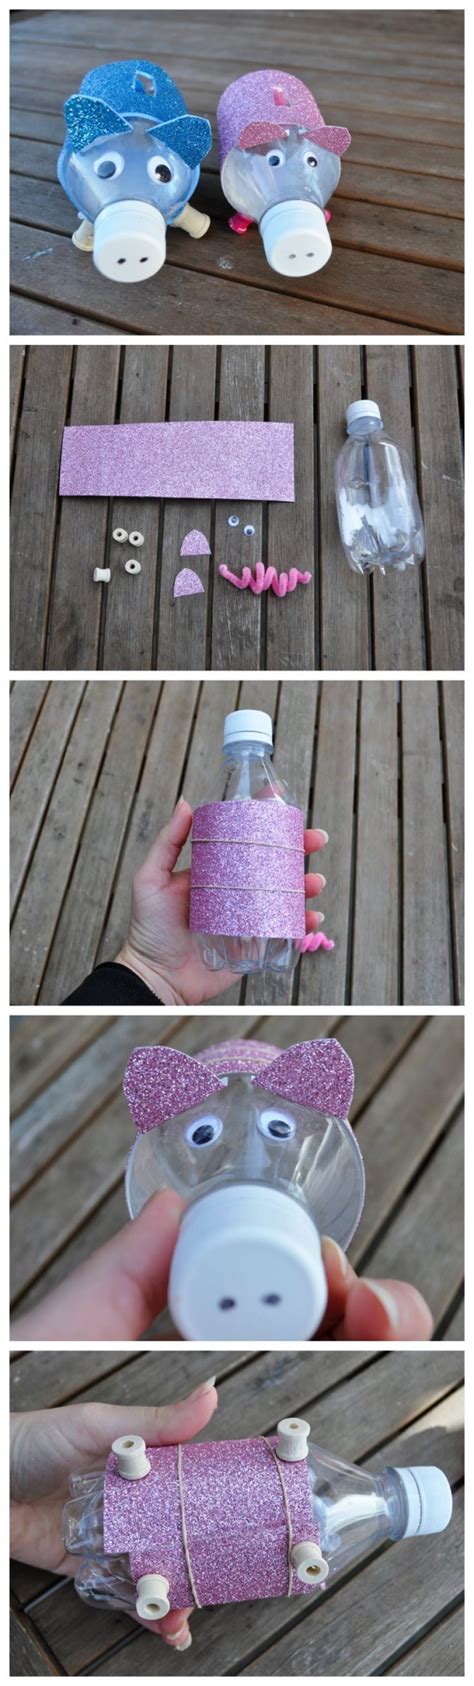 4.3 out of 5 stars. 40 Cool and Useful Piggy Bank Ideas - Bored Art